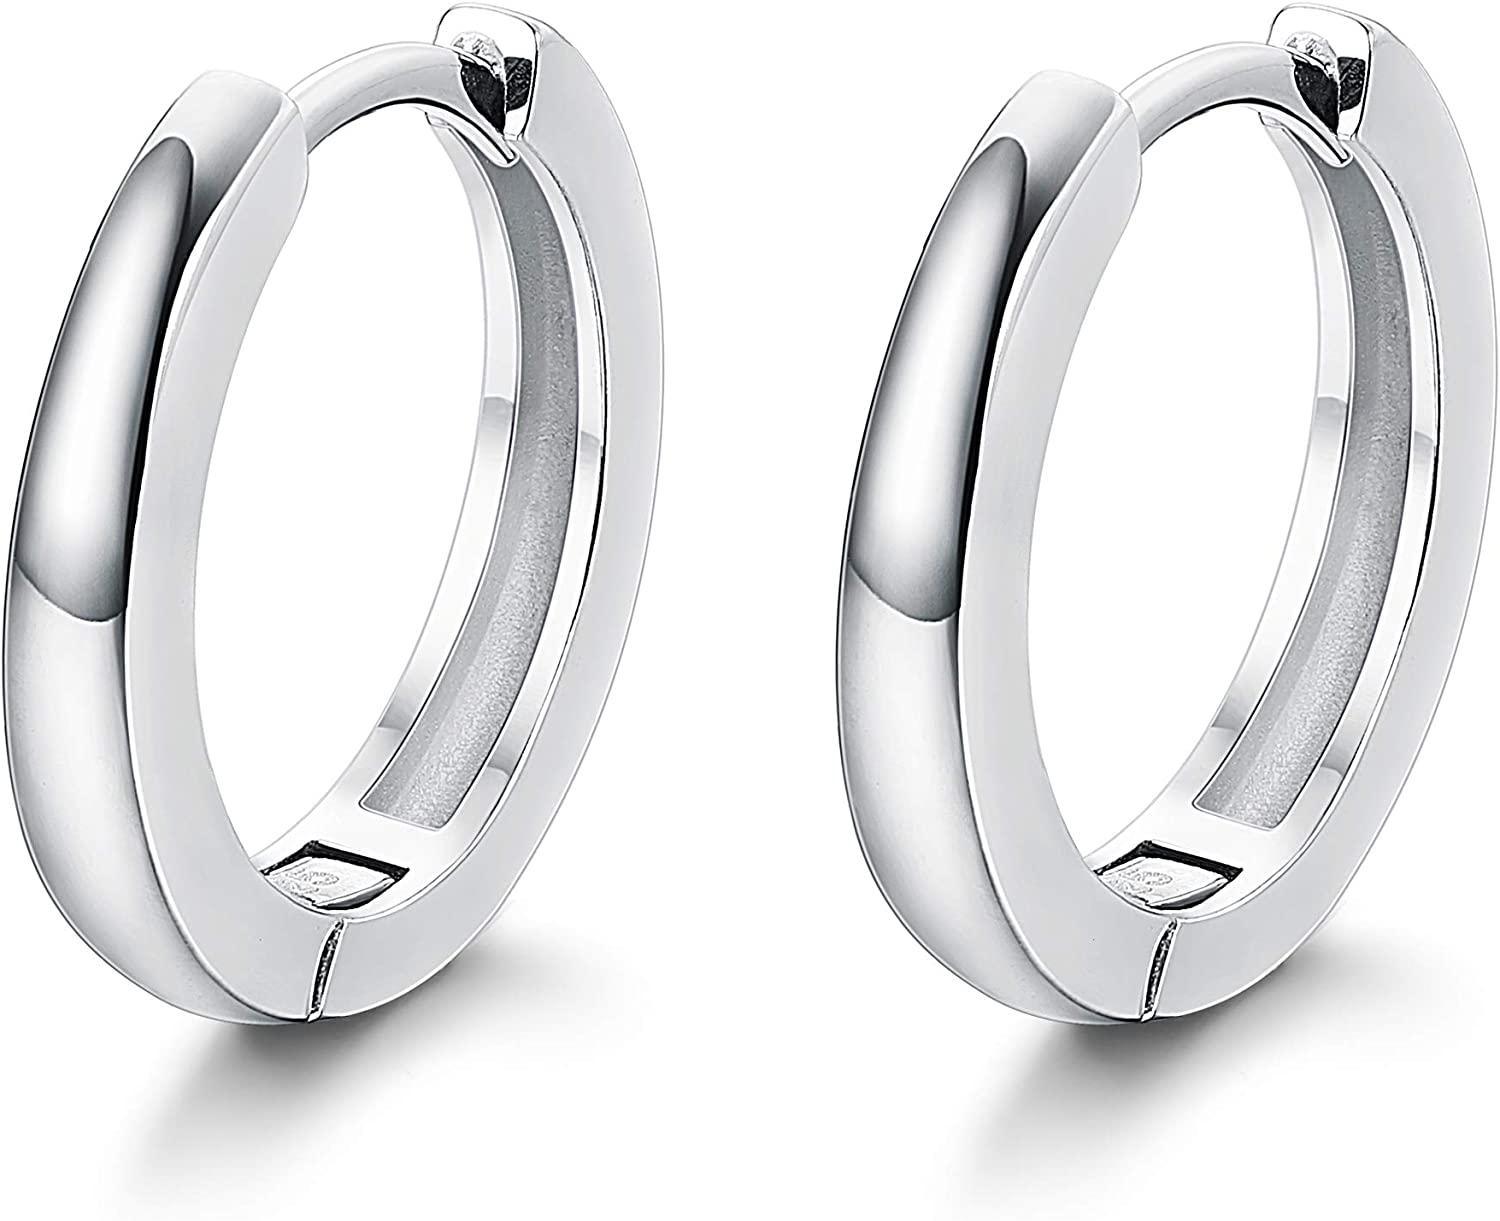 A pair of 925 Sterling Silver Hoop Earrings for Women Men Ear Cuff Small Huggie Earrings Cartilage Piercing Earrings 13mm with a minimalist design, each featuring a small diamond accent at the top.